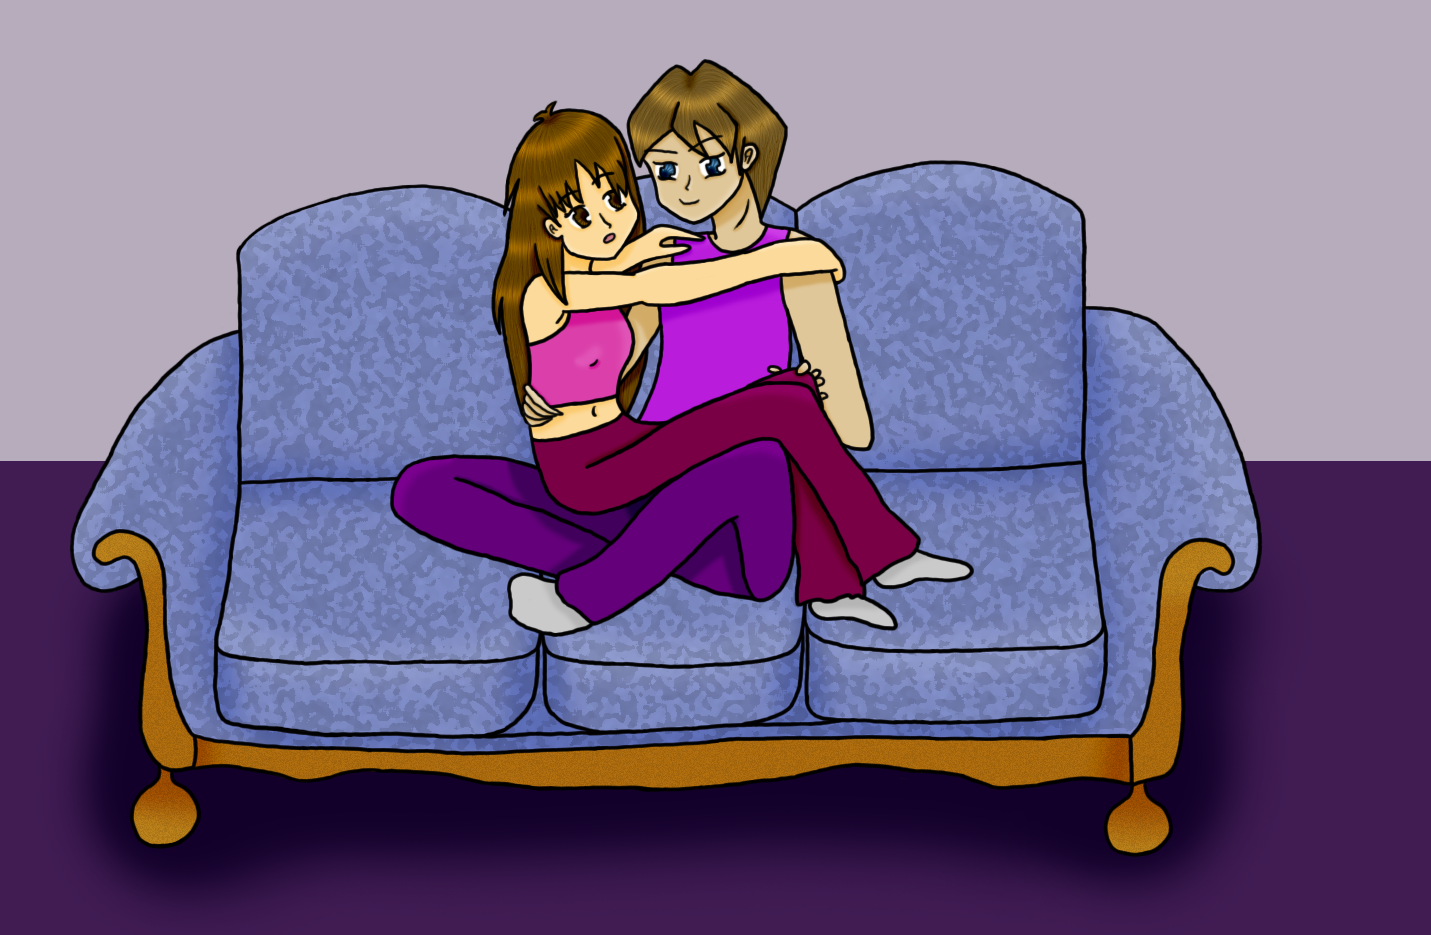 Cuddling on the Couch by KelekiahGaladrian